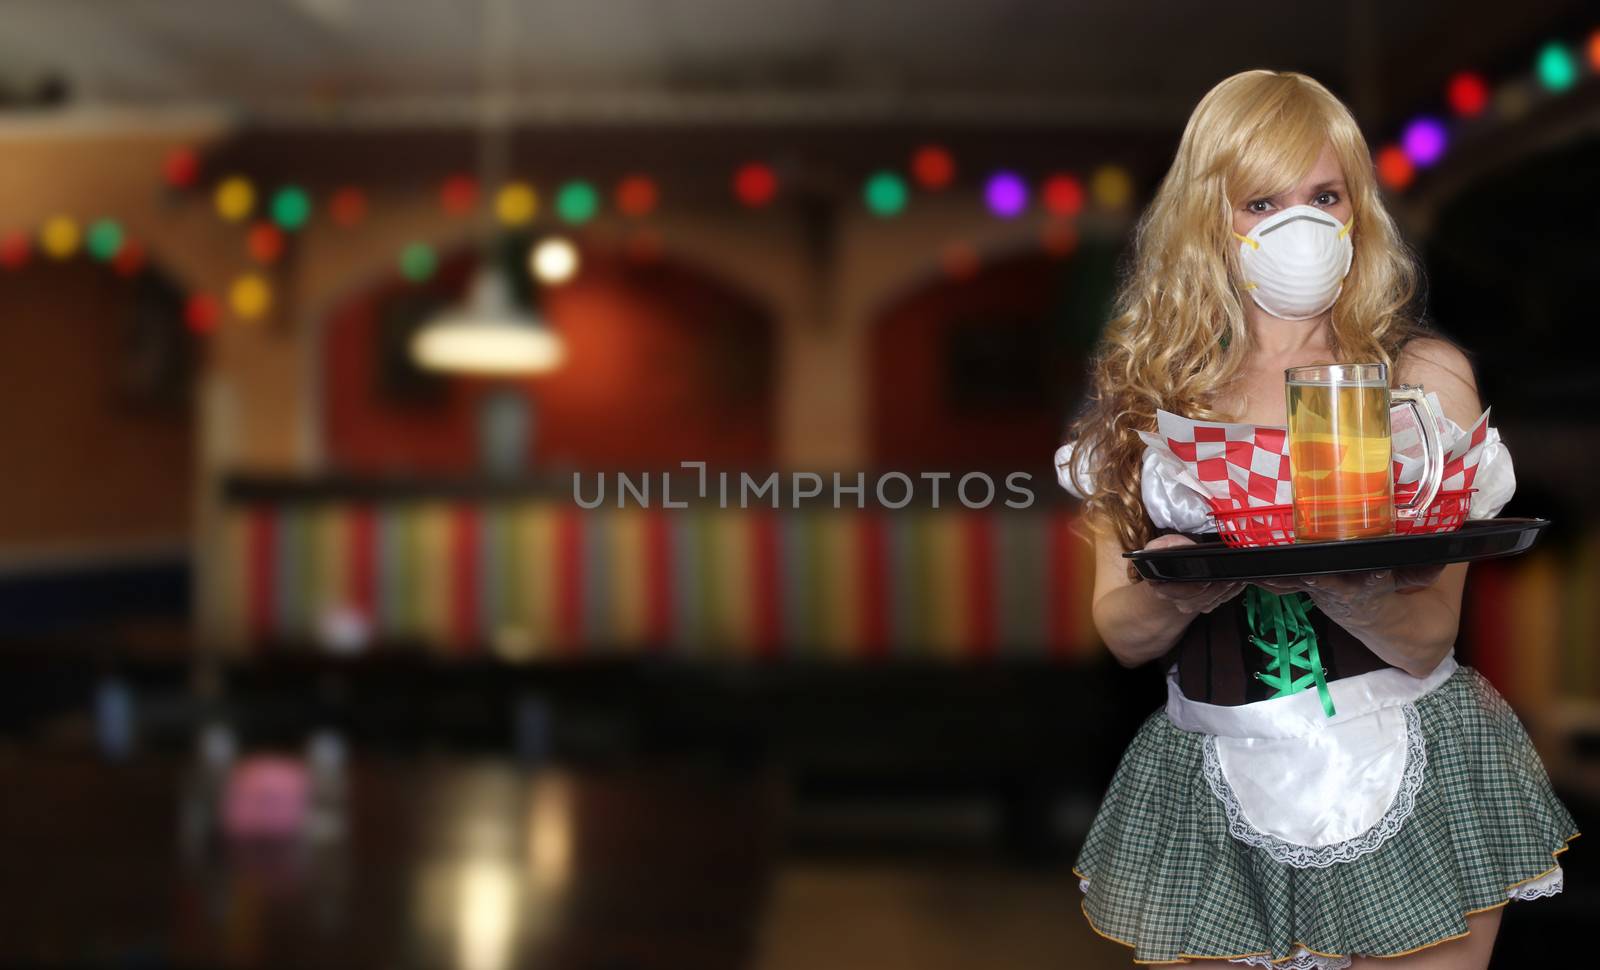 Tavern Waitress Wearing N95 Mask With Tray of Food, Shallow DOF Focus on Tray